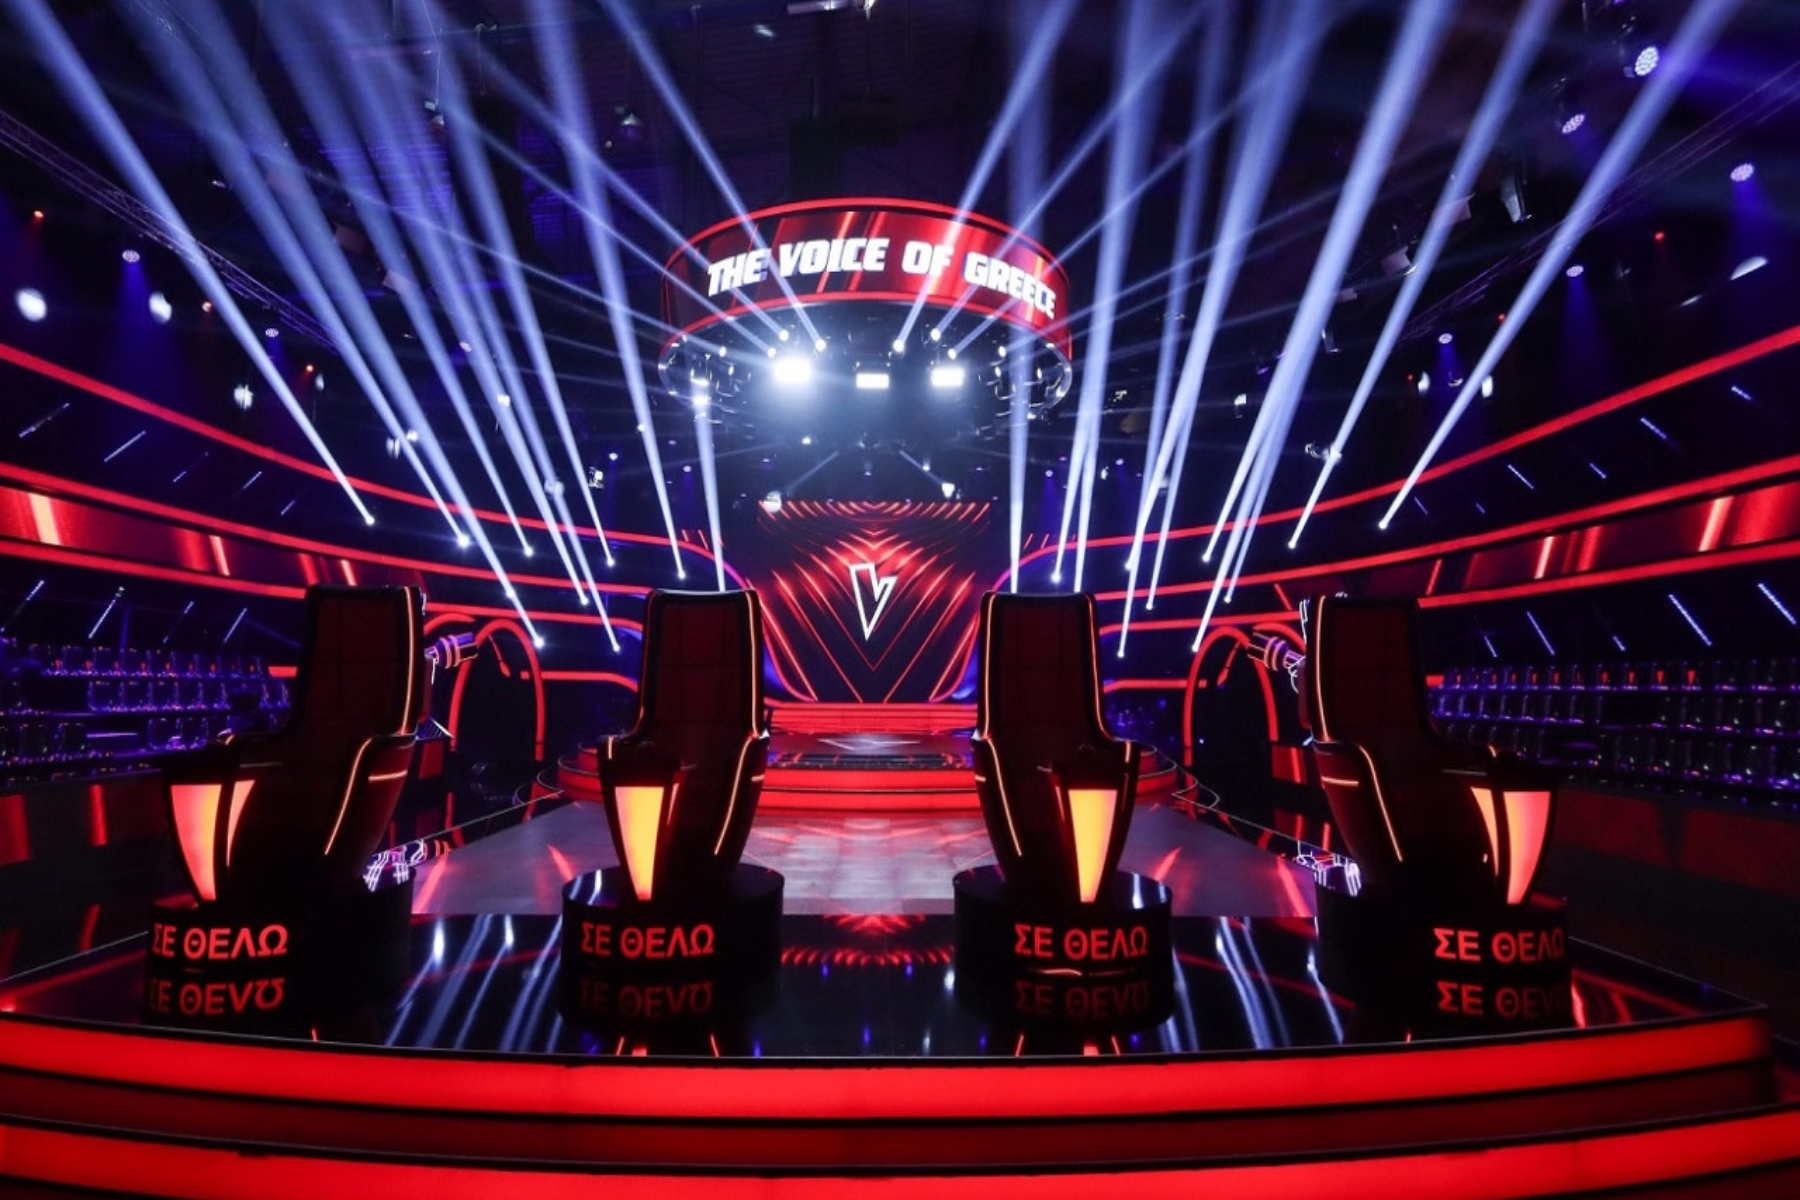 The Voice of Greece 14/01: Τα knockouts συνεχίζονται on stage [trailer]